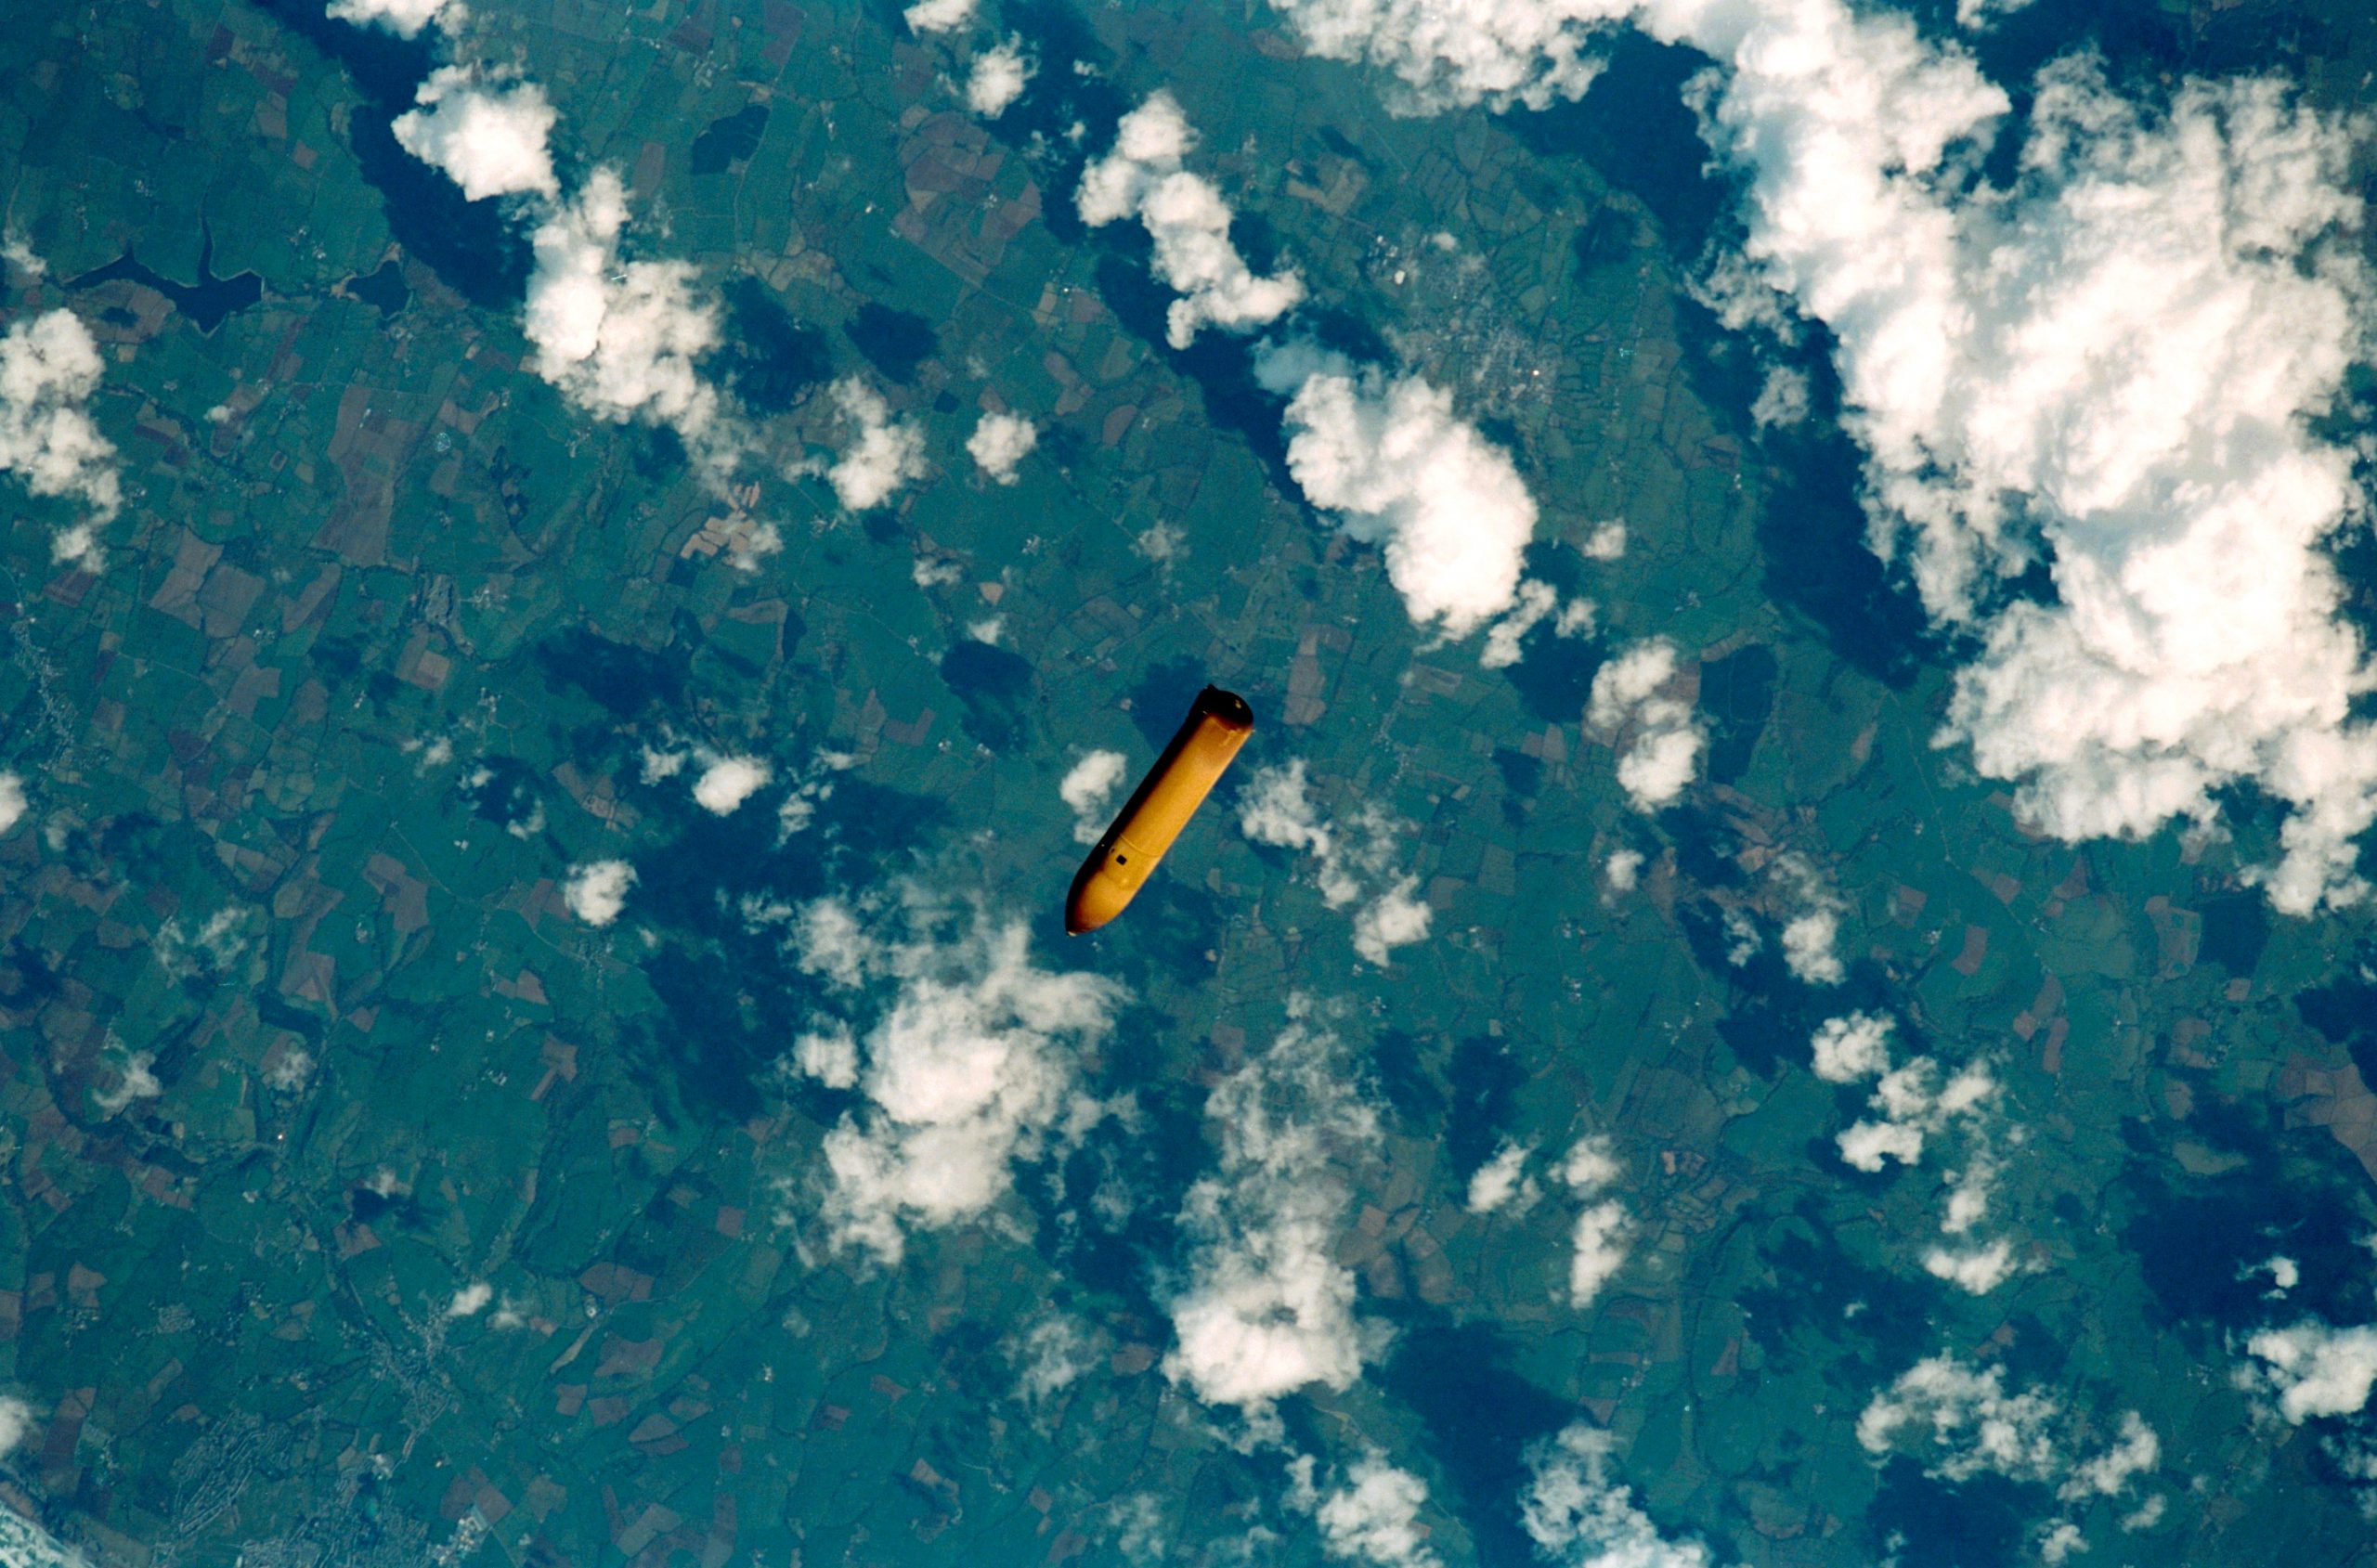 The external tank from sts-102 falls to earth.